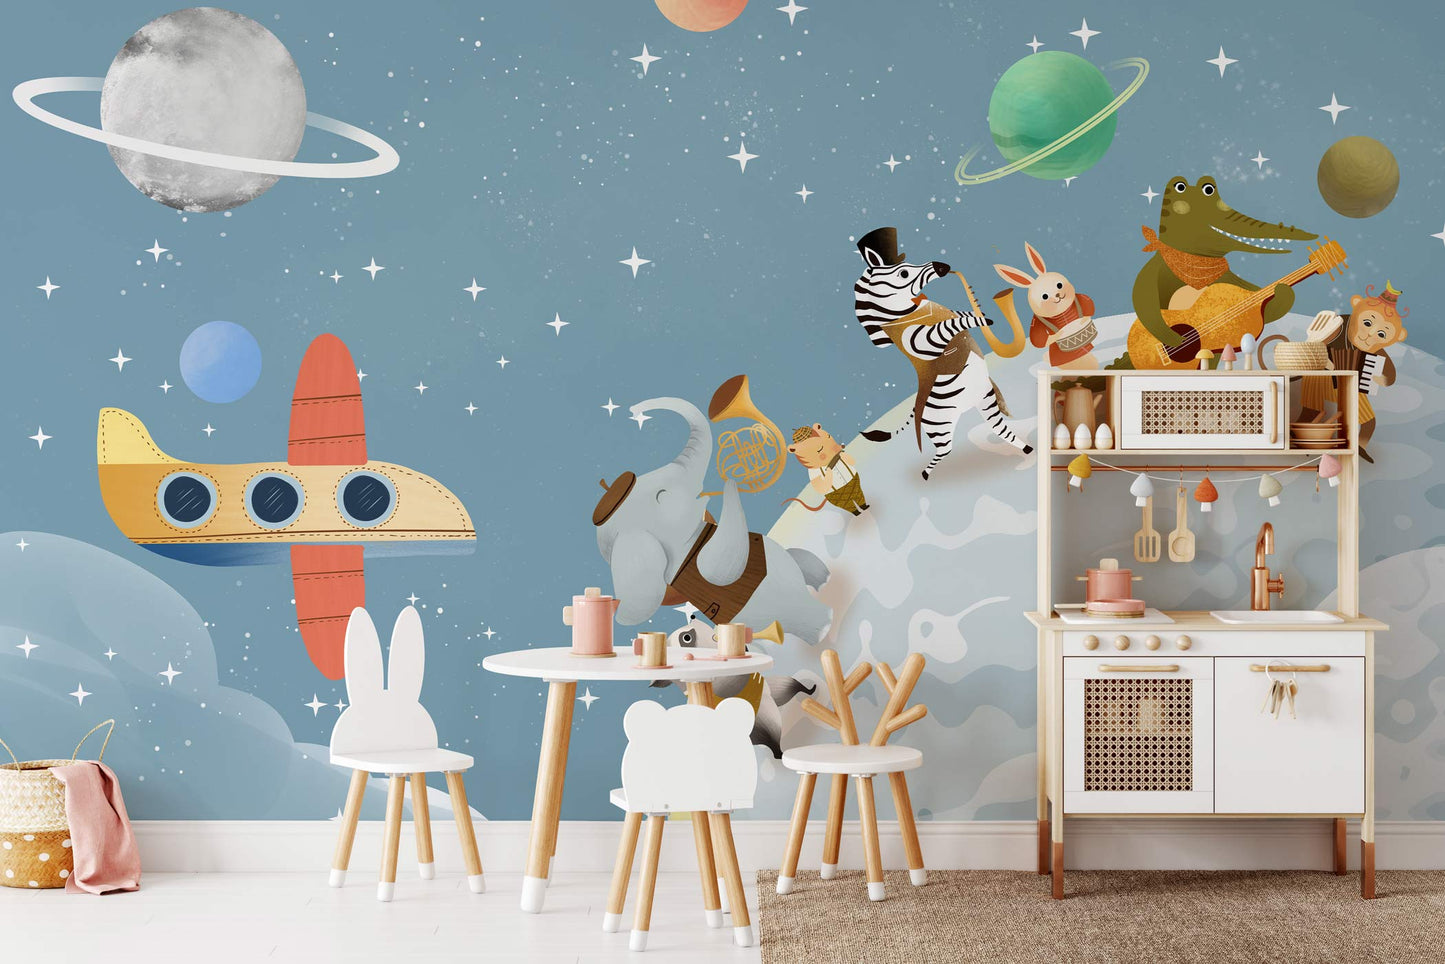 Wallpaper mural featuring roaming animals from the universe affixed on the wall in the nursery.